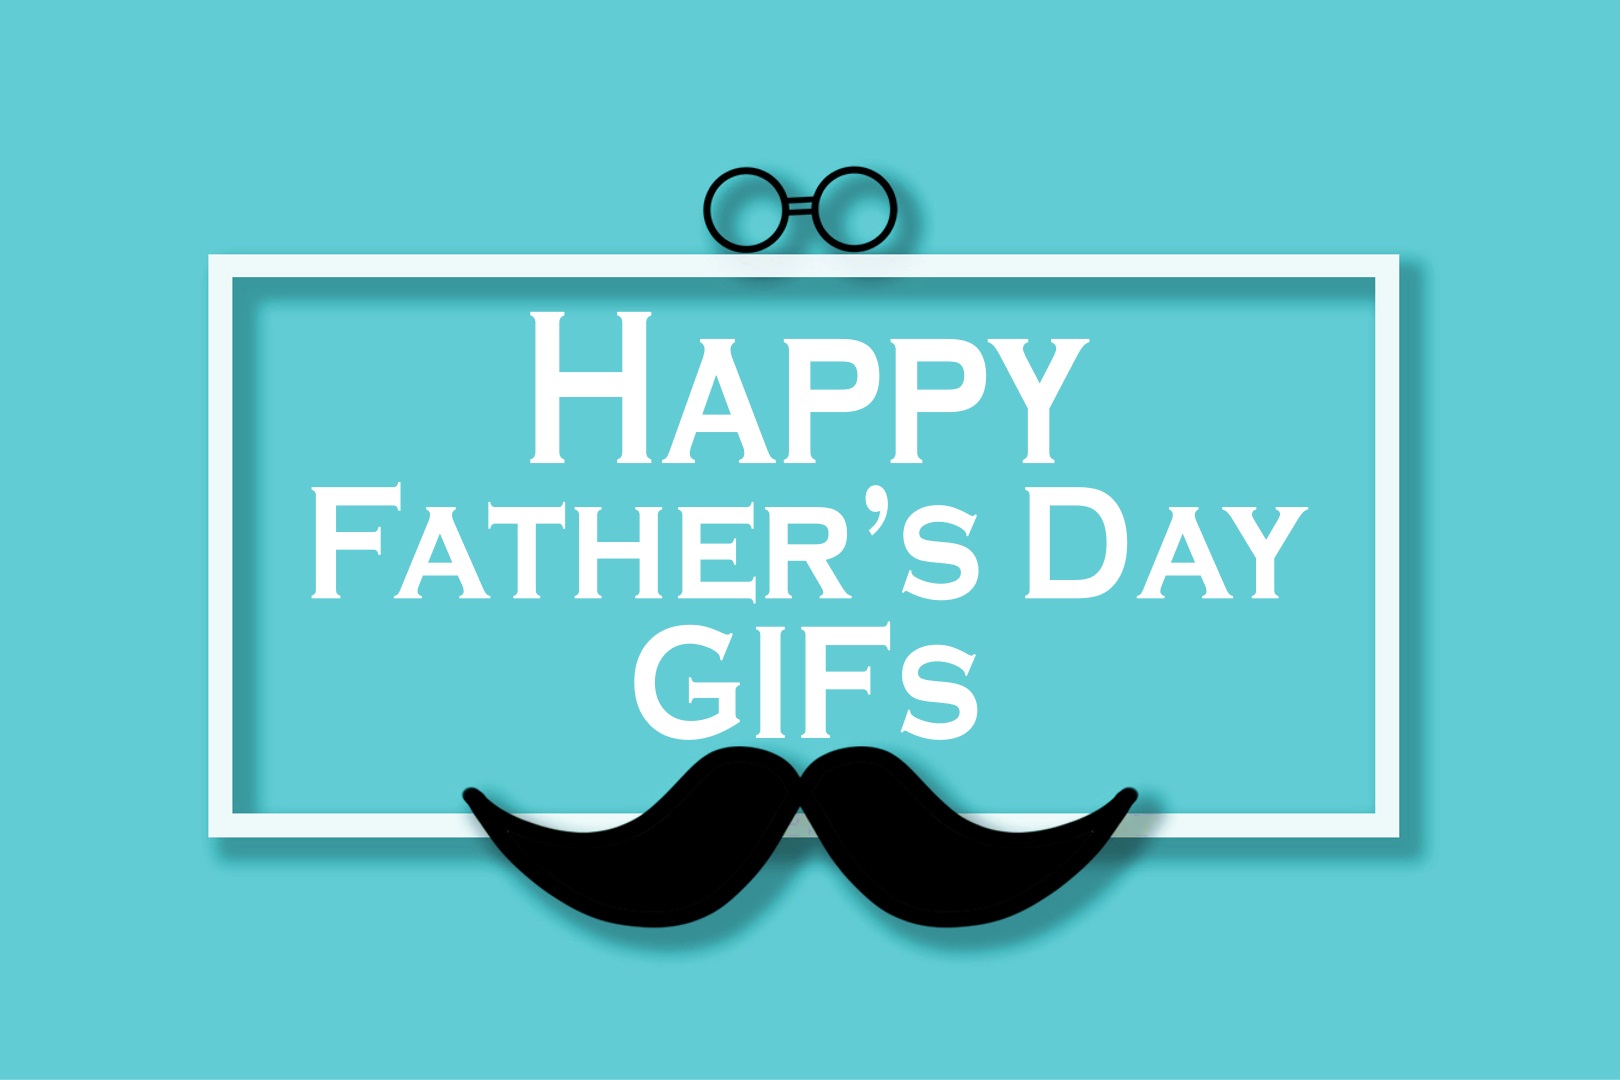 Happy Father's Day GIFs